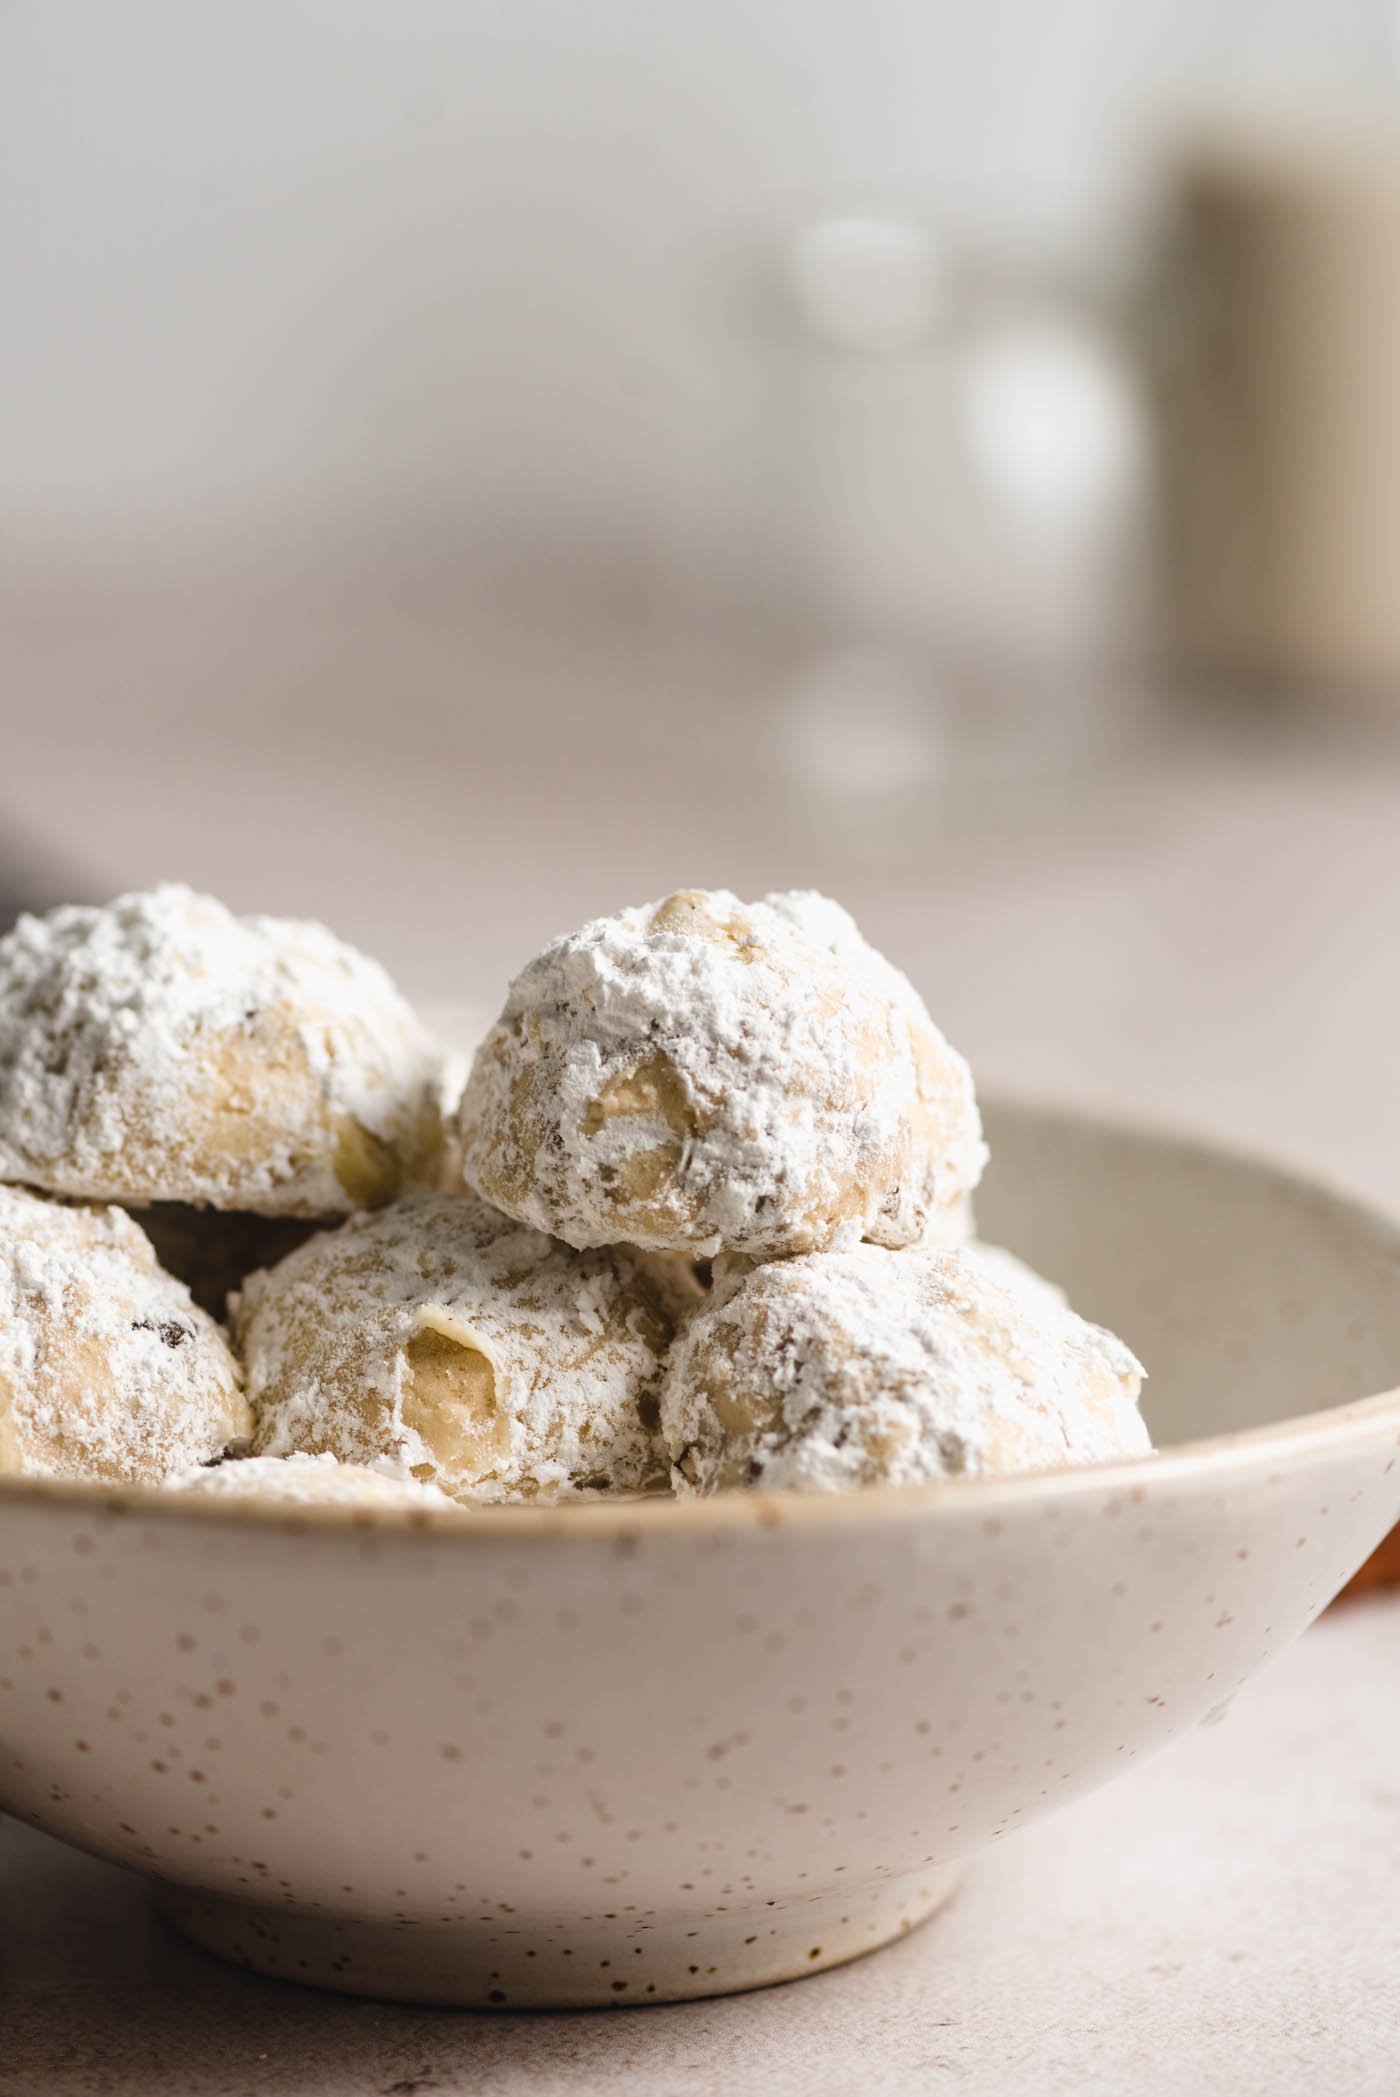 Powdered sugar-coated snowballs cookies in a small bowl.